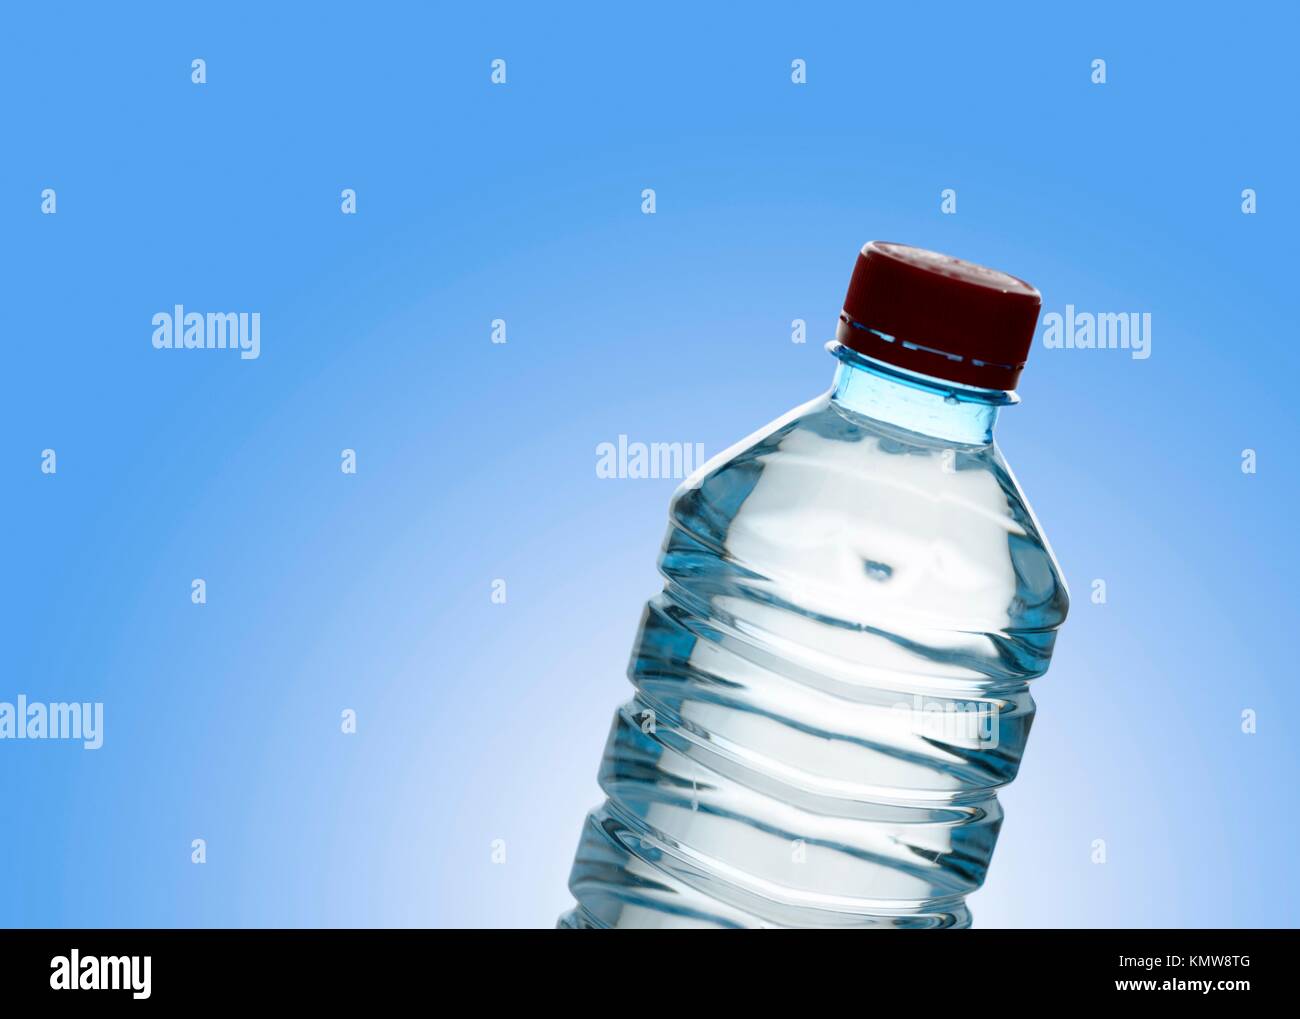 https://c8.alamy.com/comp/KMW8TG/purified-spring-water-in-the-bottle-over-clear-blue-background-KMW8TG.jpg